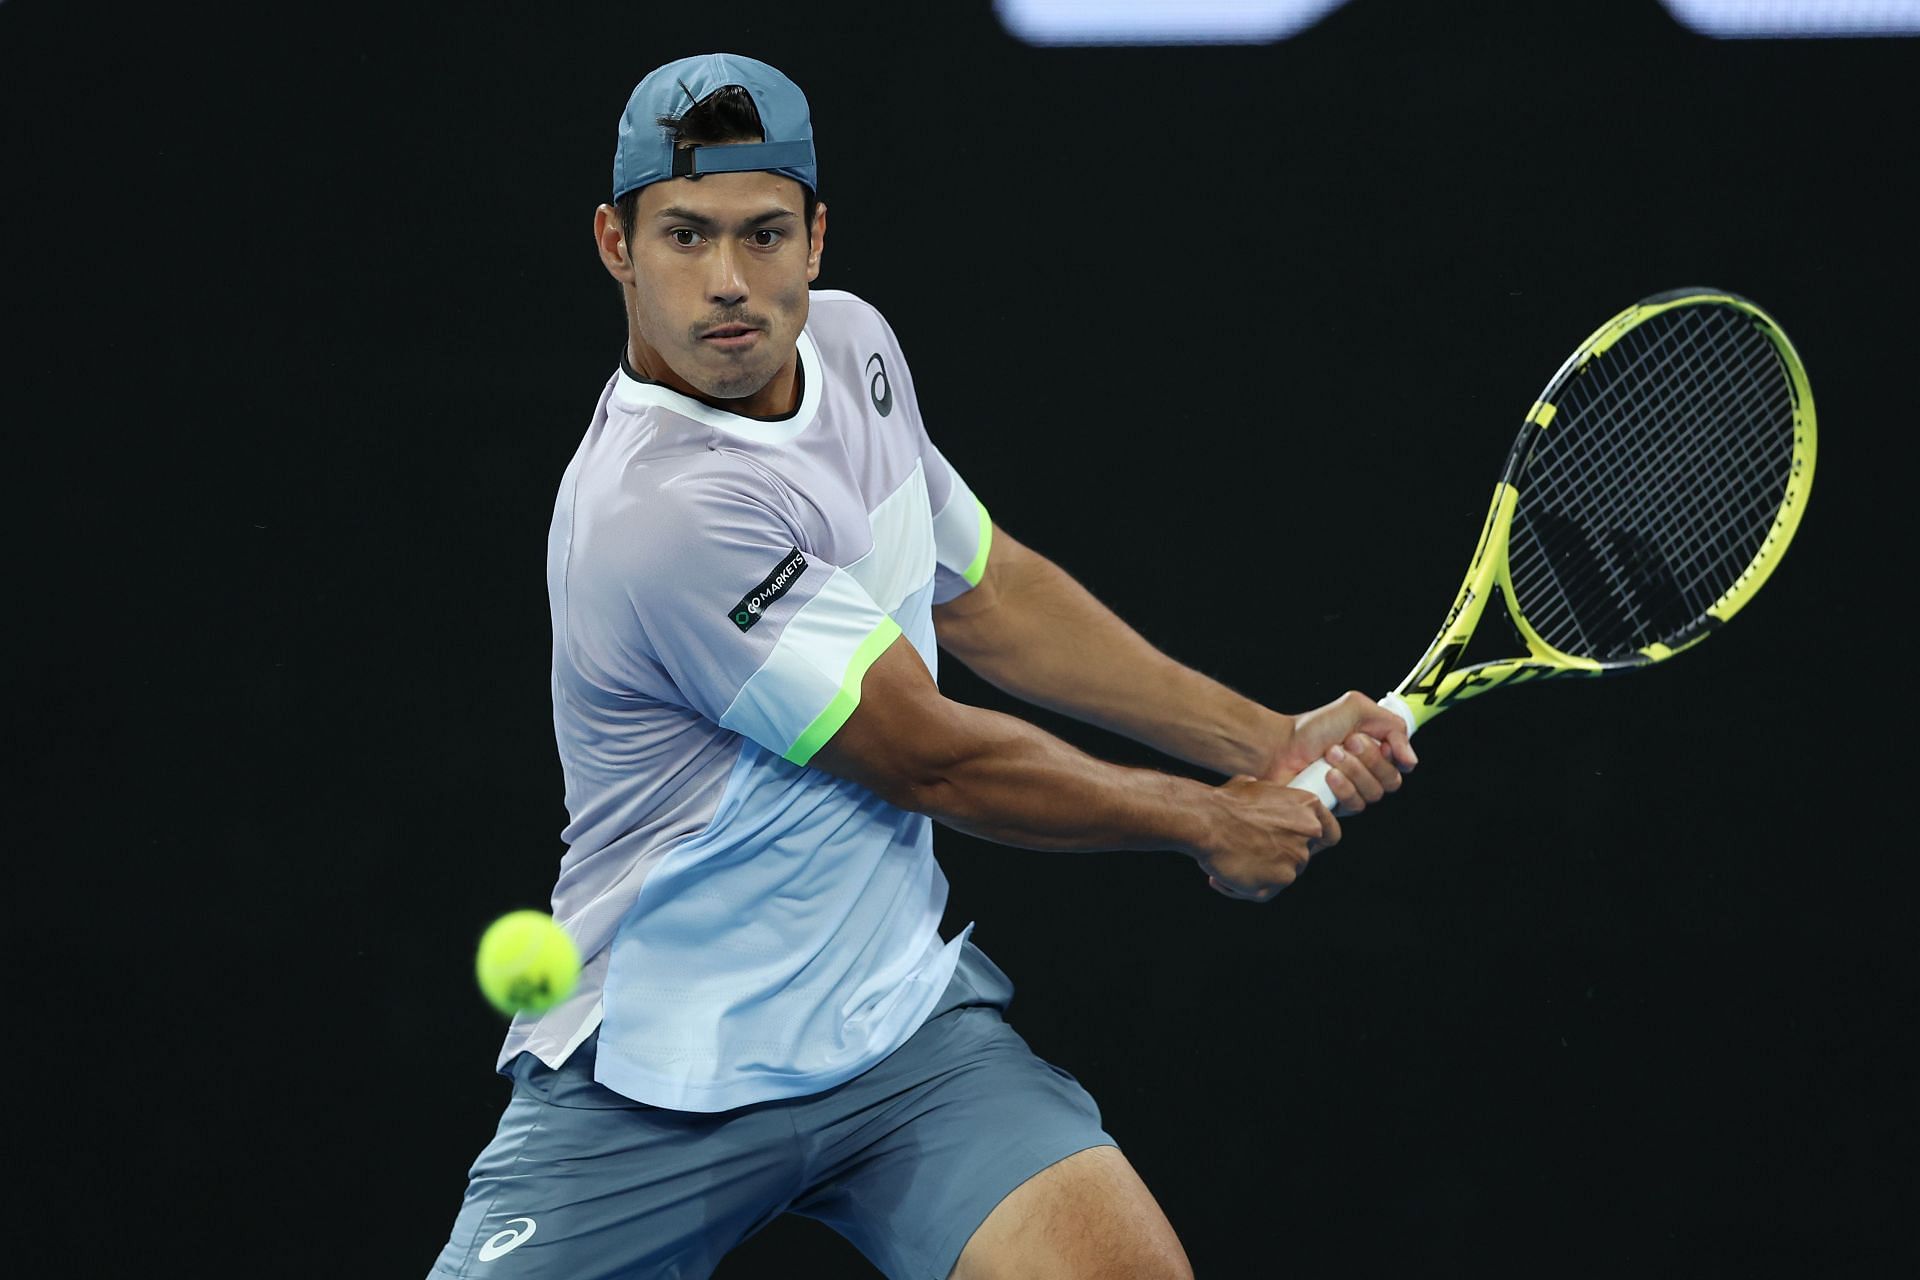 Kubler is into the third round at Indian Wells